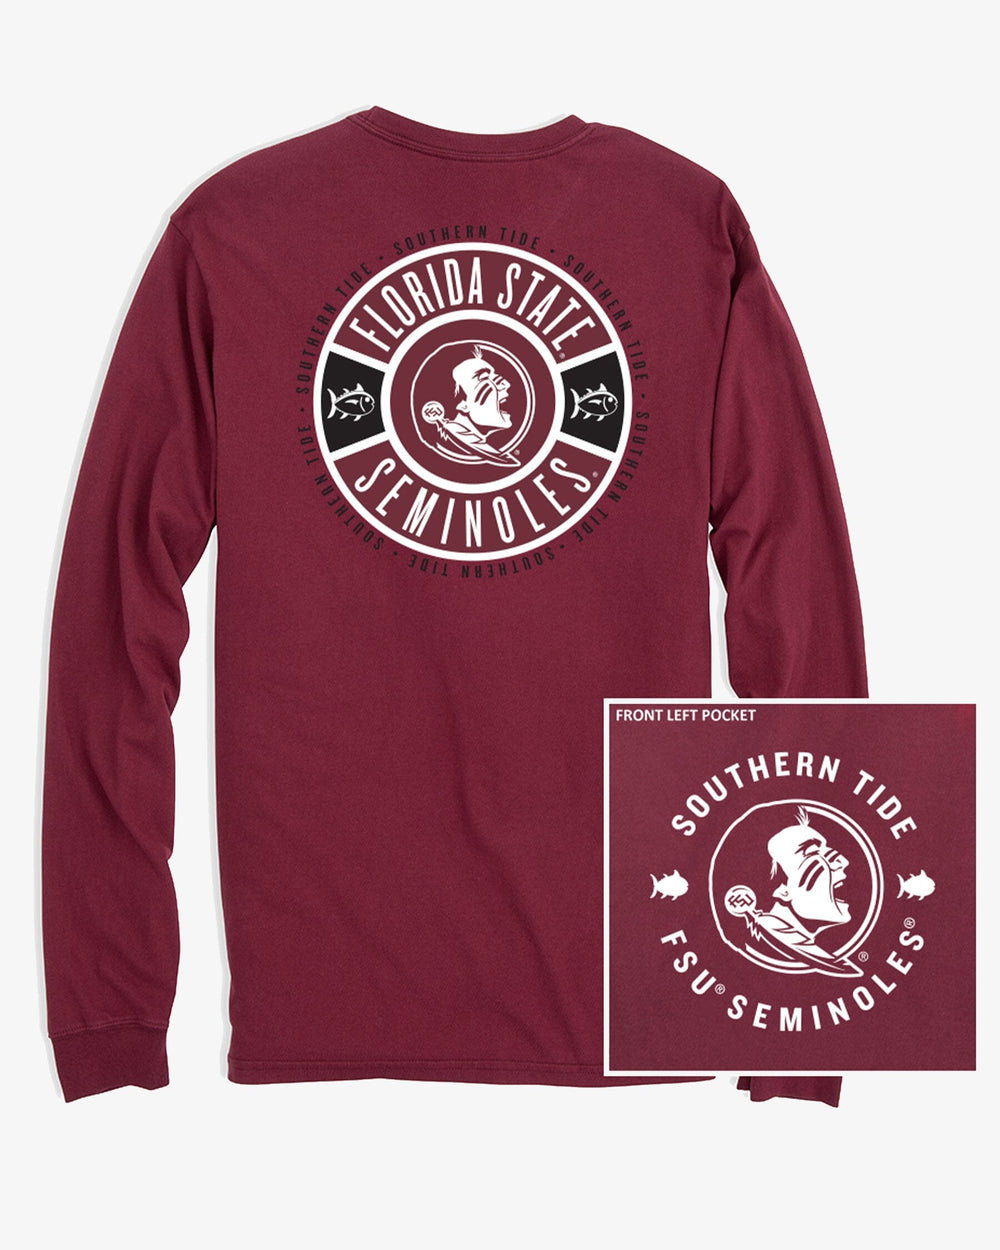 The front view of the Southern Tide FSU Seminoles Ring Badge T-Shirt by Southern Tide - Chianti